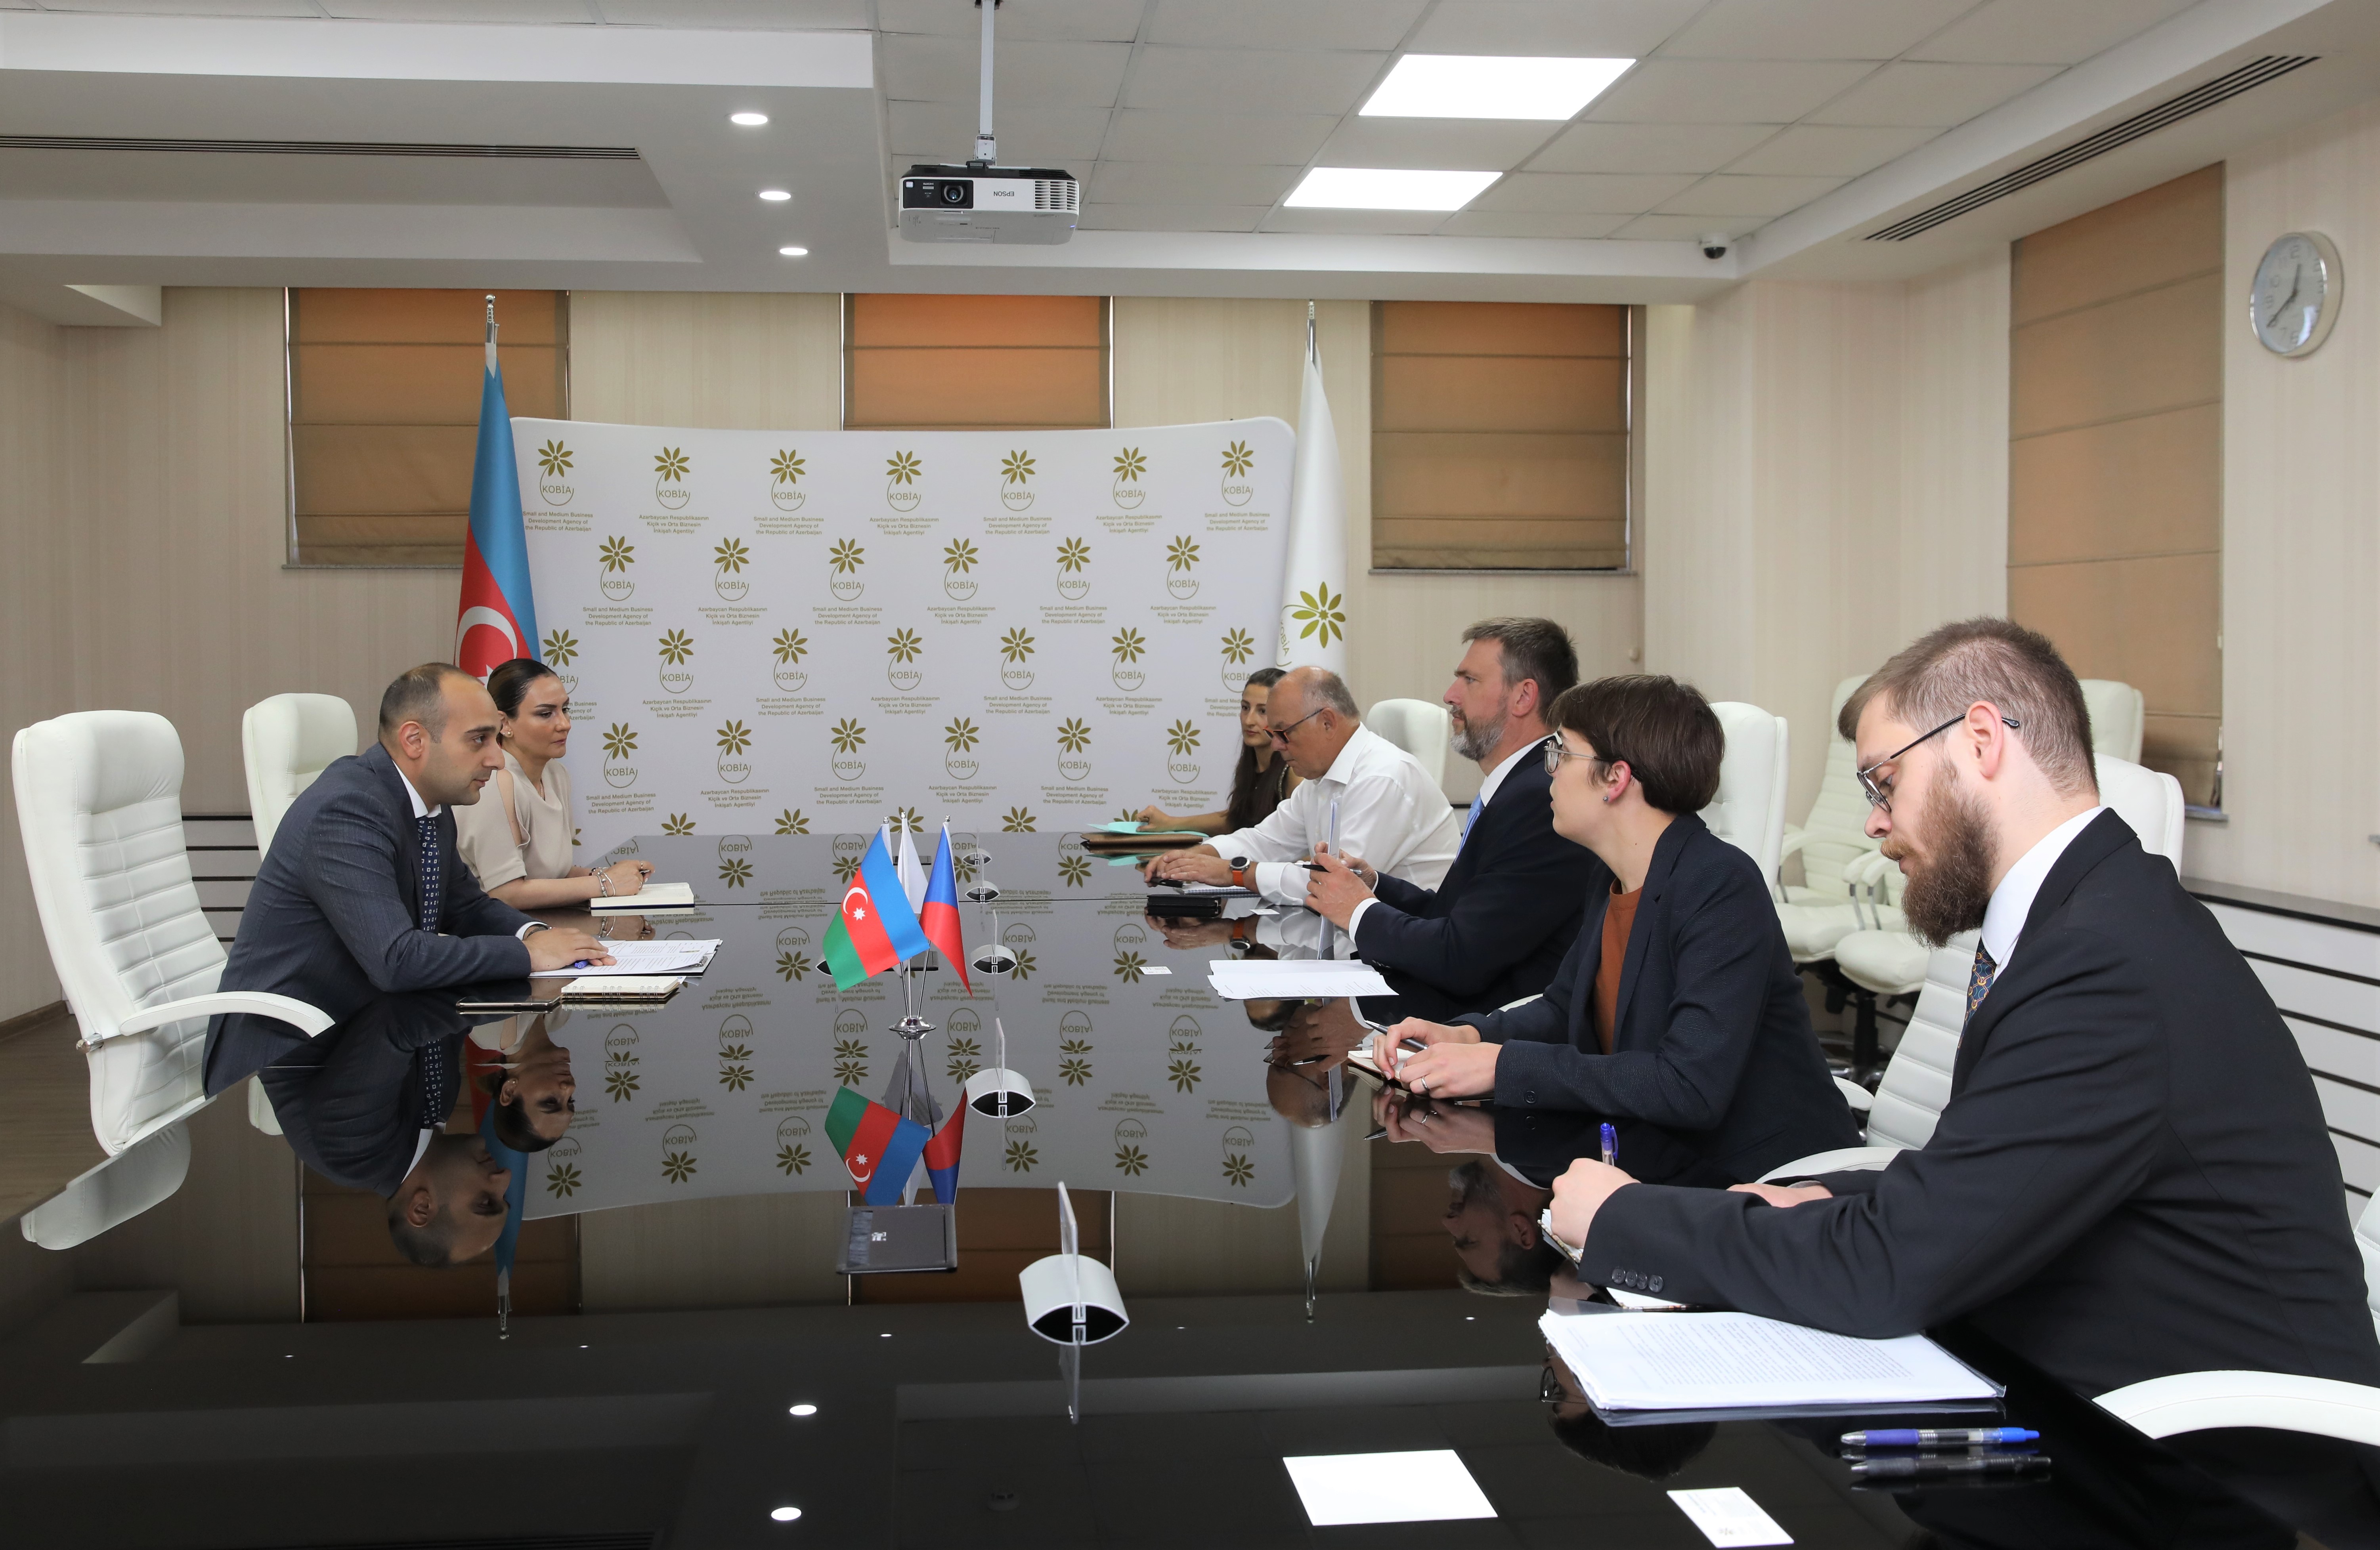 A meeting with the Czech delegation was held at KOBİA 